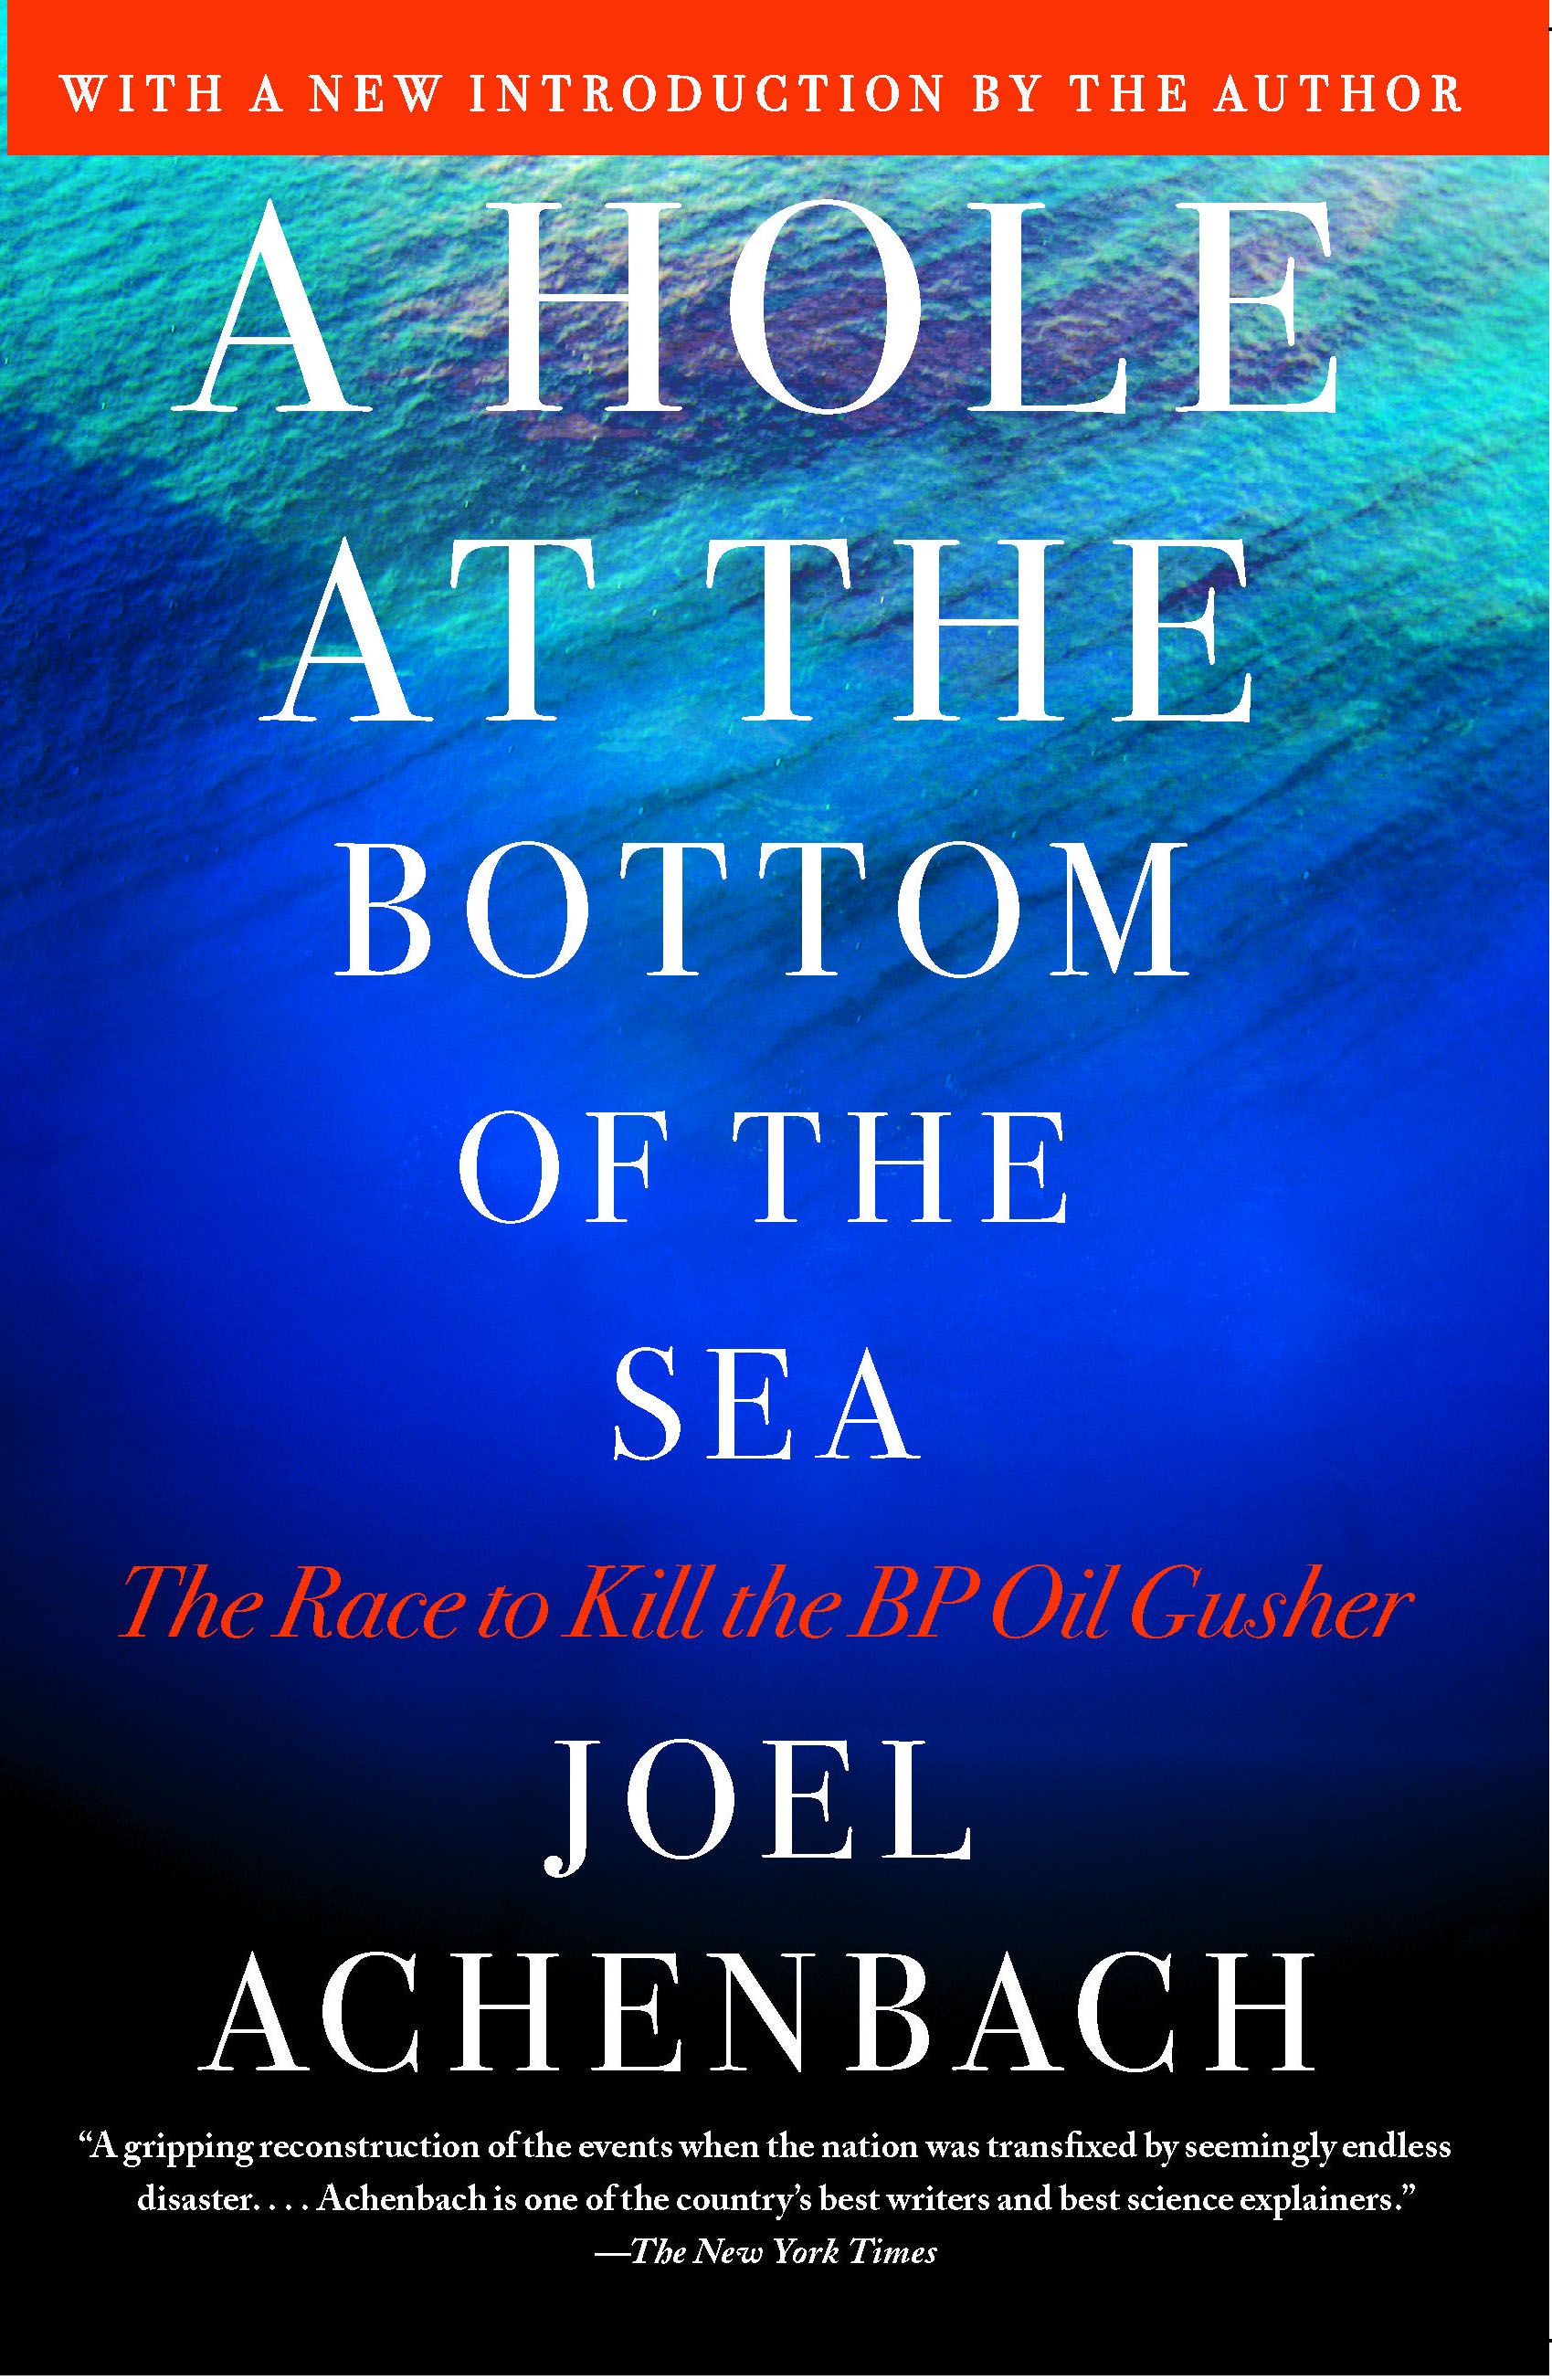 best of Sea the of atthe Hole bottom